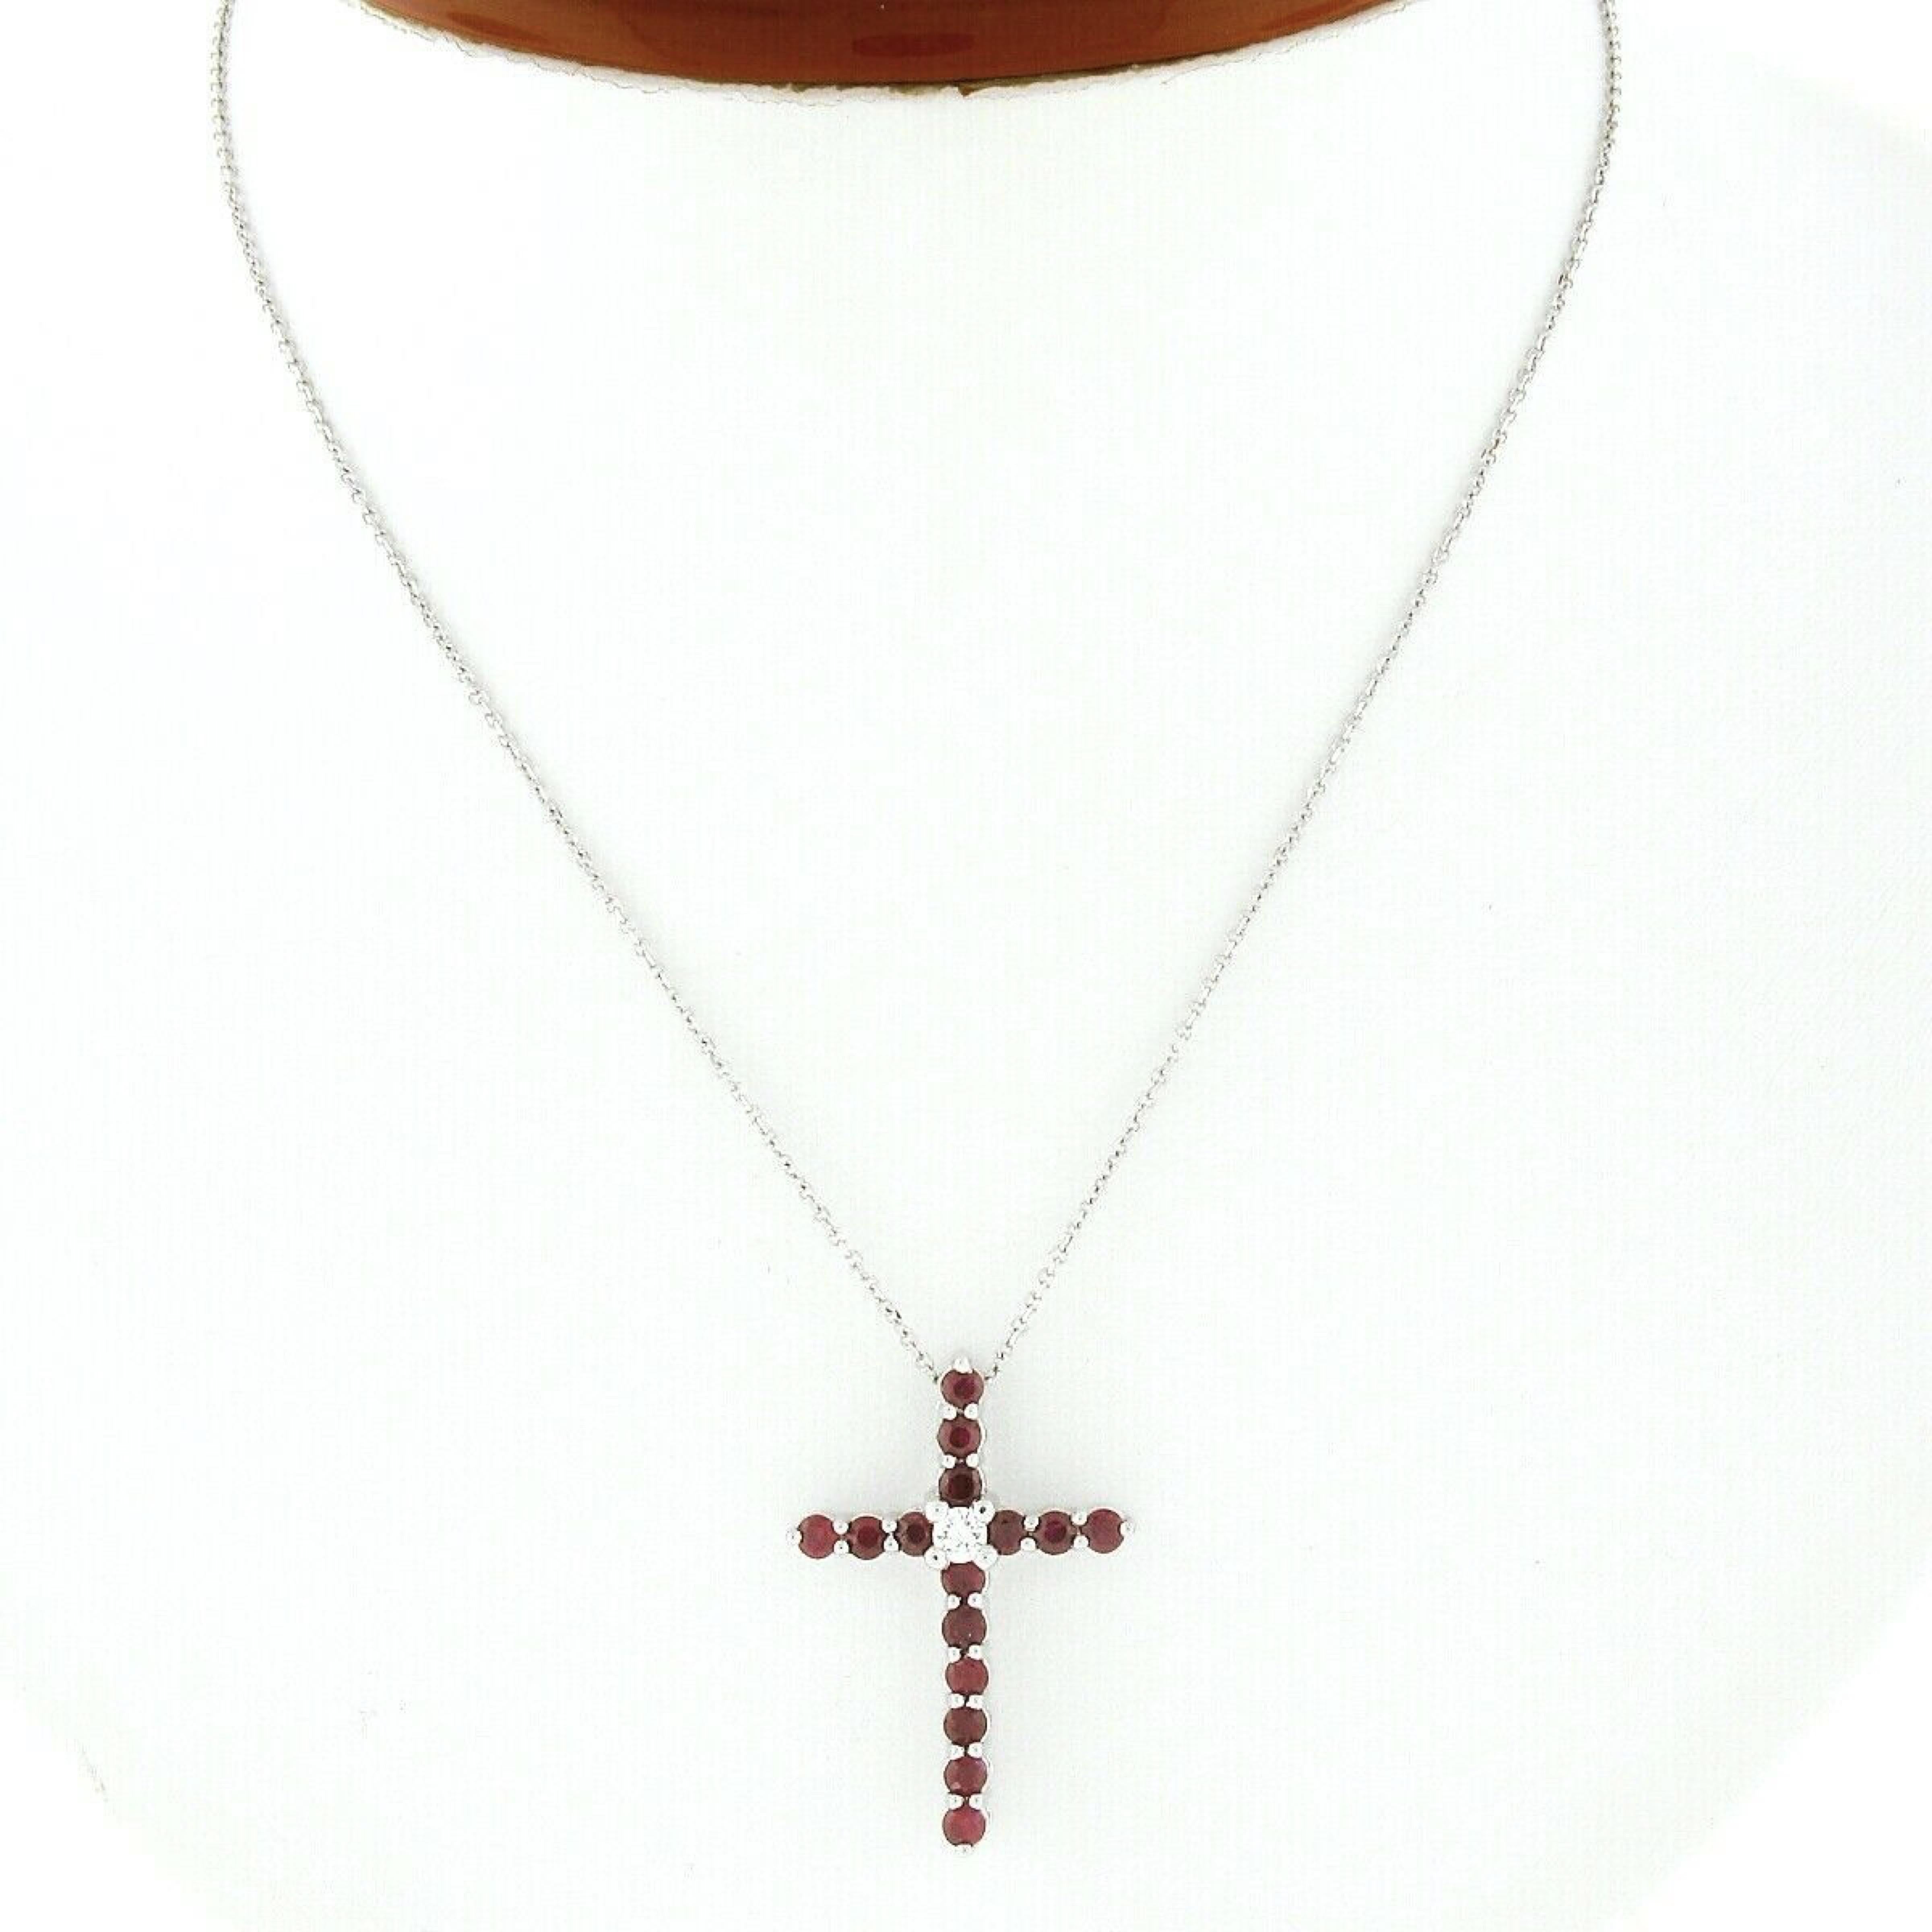 New 14K White Gold 1.70ctw Round Ruby & Diamond Cross Pendant Chain Necklace For Sale 1